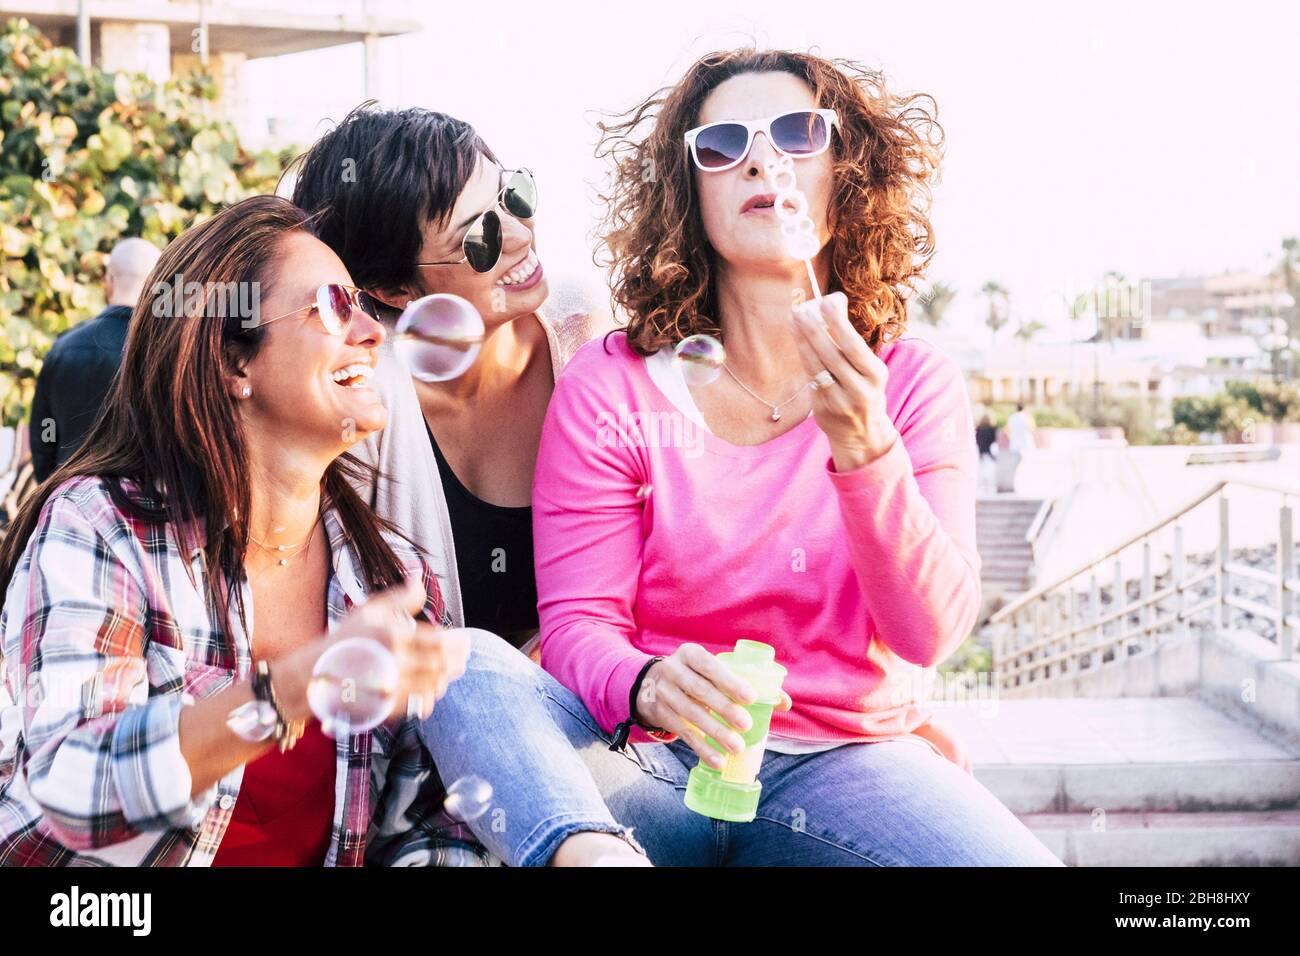 Playful real life concept with three cheerful smiling middle age women friends anejoying and laughing togehter playing with soap bubbles in outdoor leisure activity - playful and happiness concept for people Stock Photo